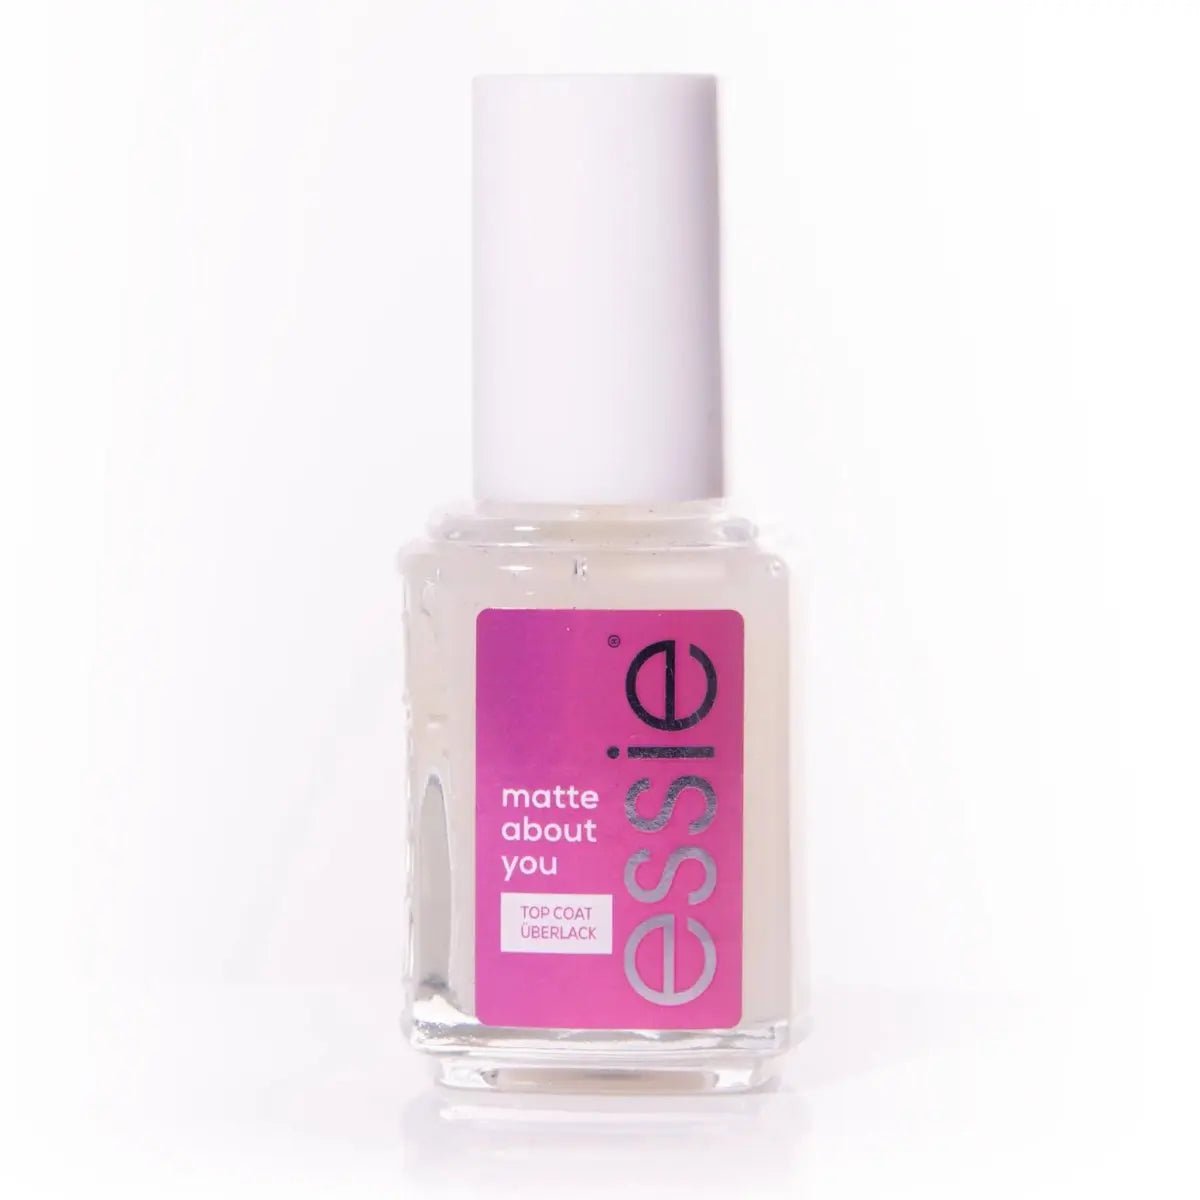 Image of Essie Matte About You Top Coat Nail Polish